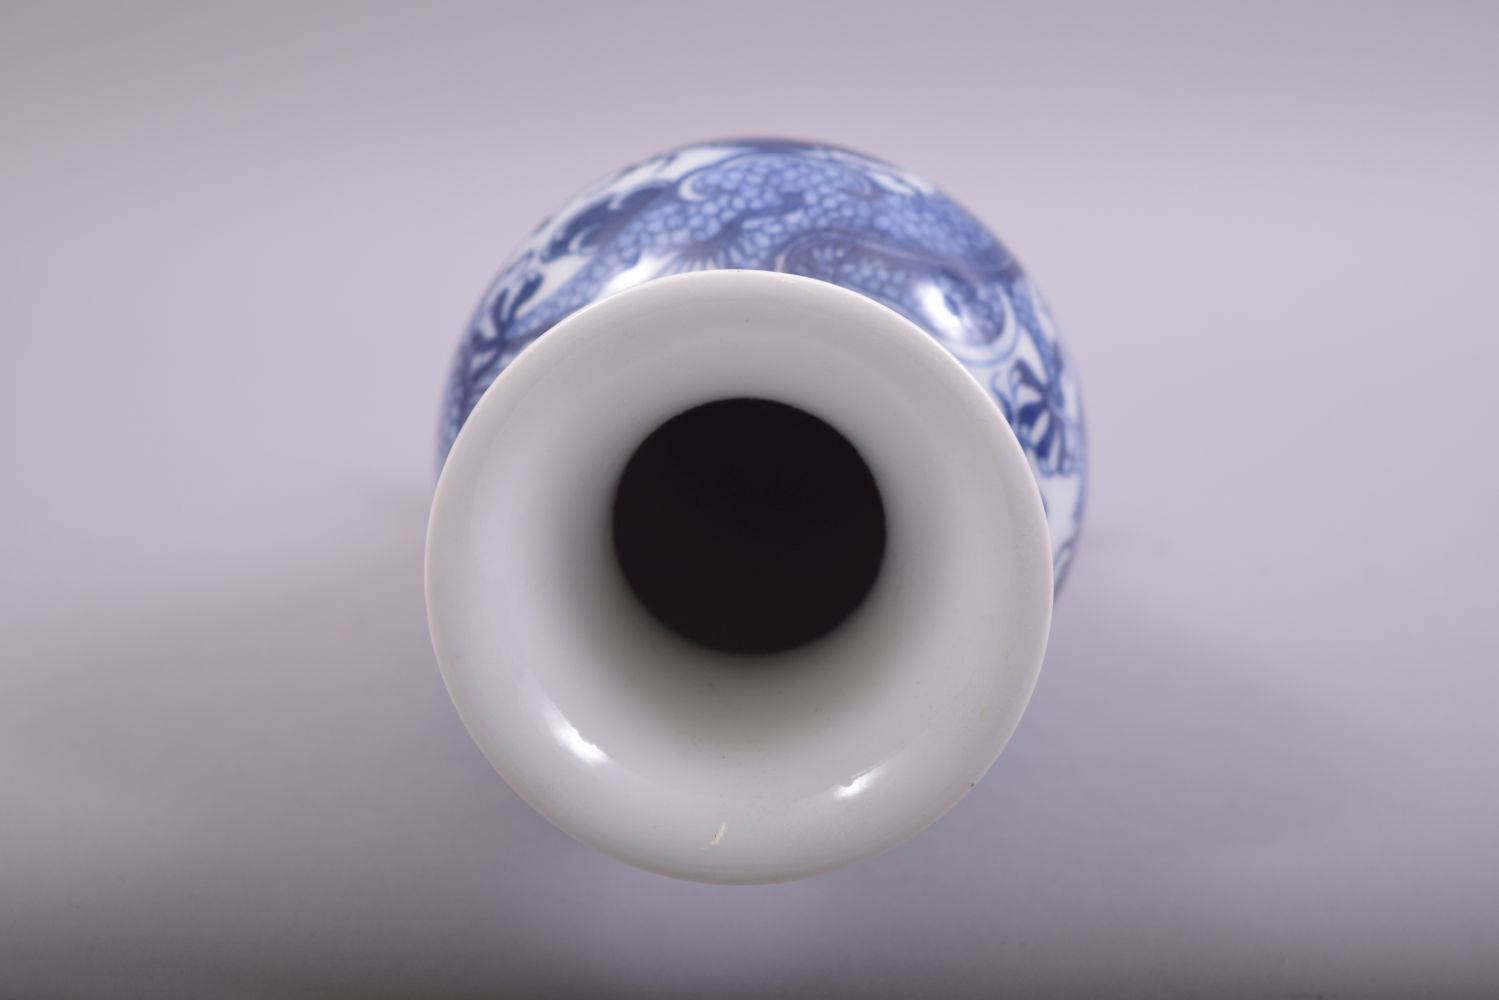 A CHINESE BLUE AND WHITE PORCELAIN DRAGON VASE, 23.5cm high. - Image 5 of 6